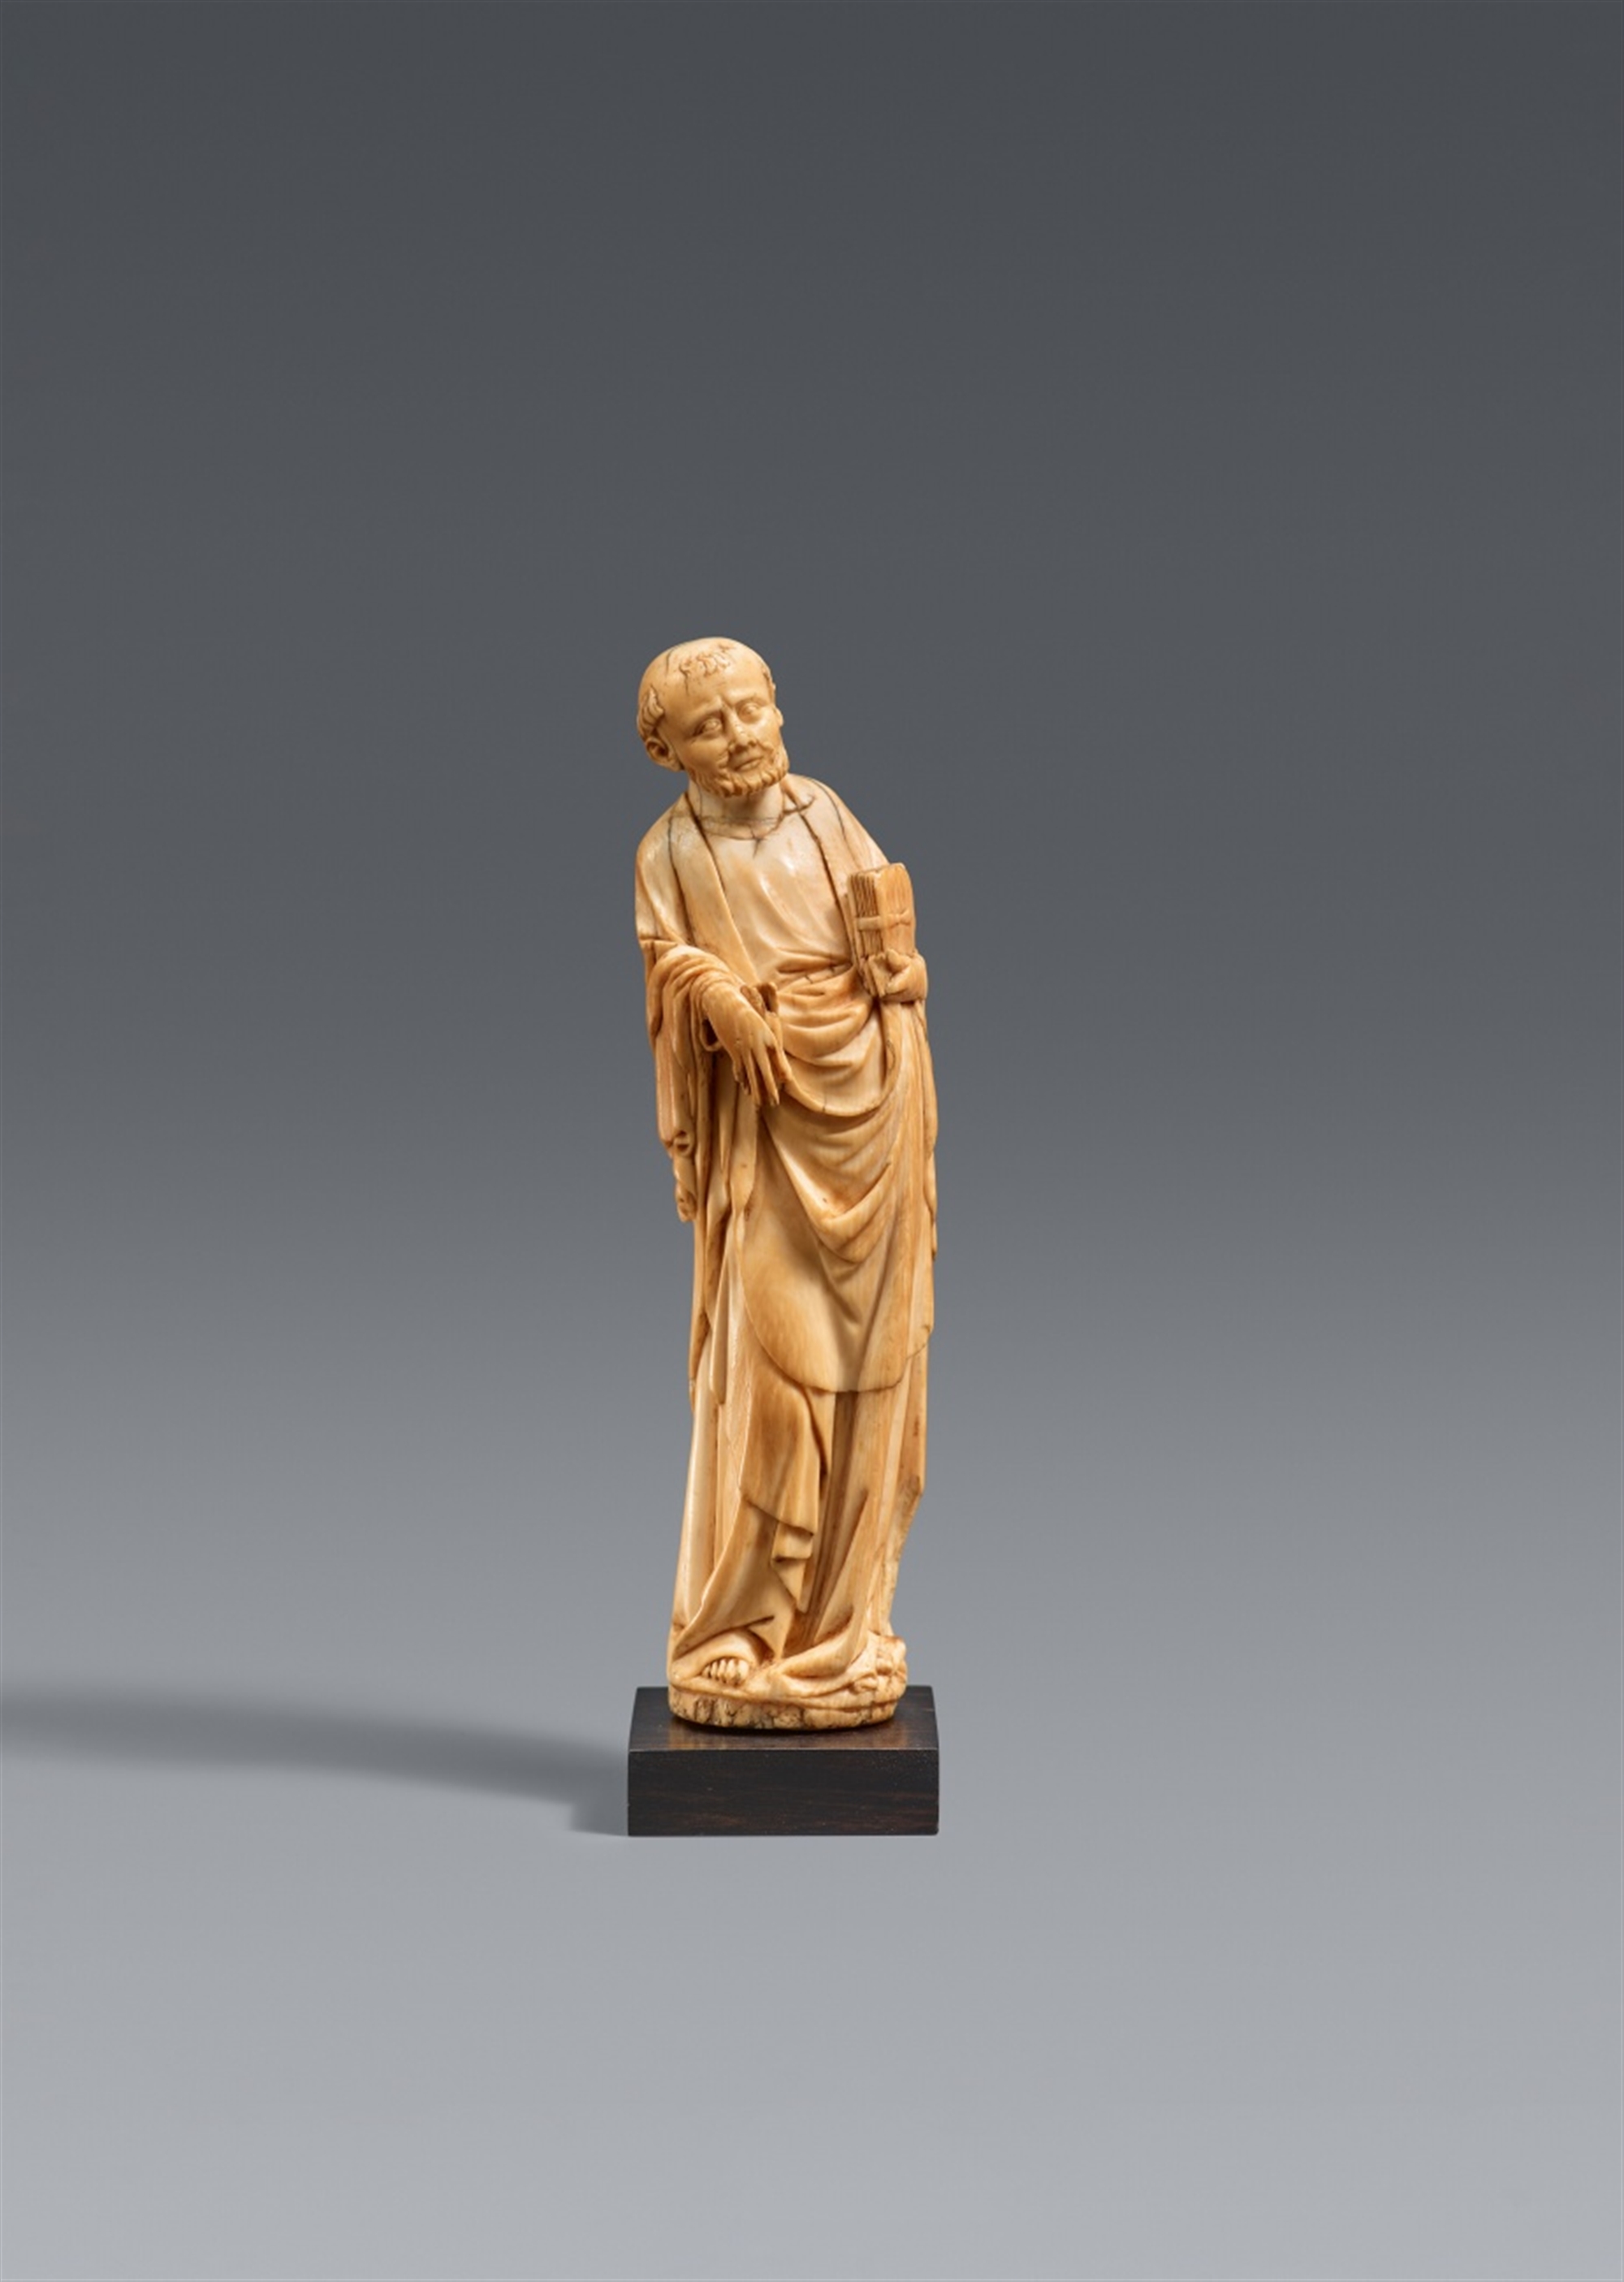 A German carved ivory figure of a monk saint, second half 14th century